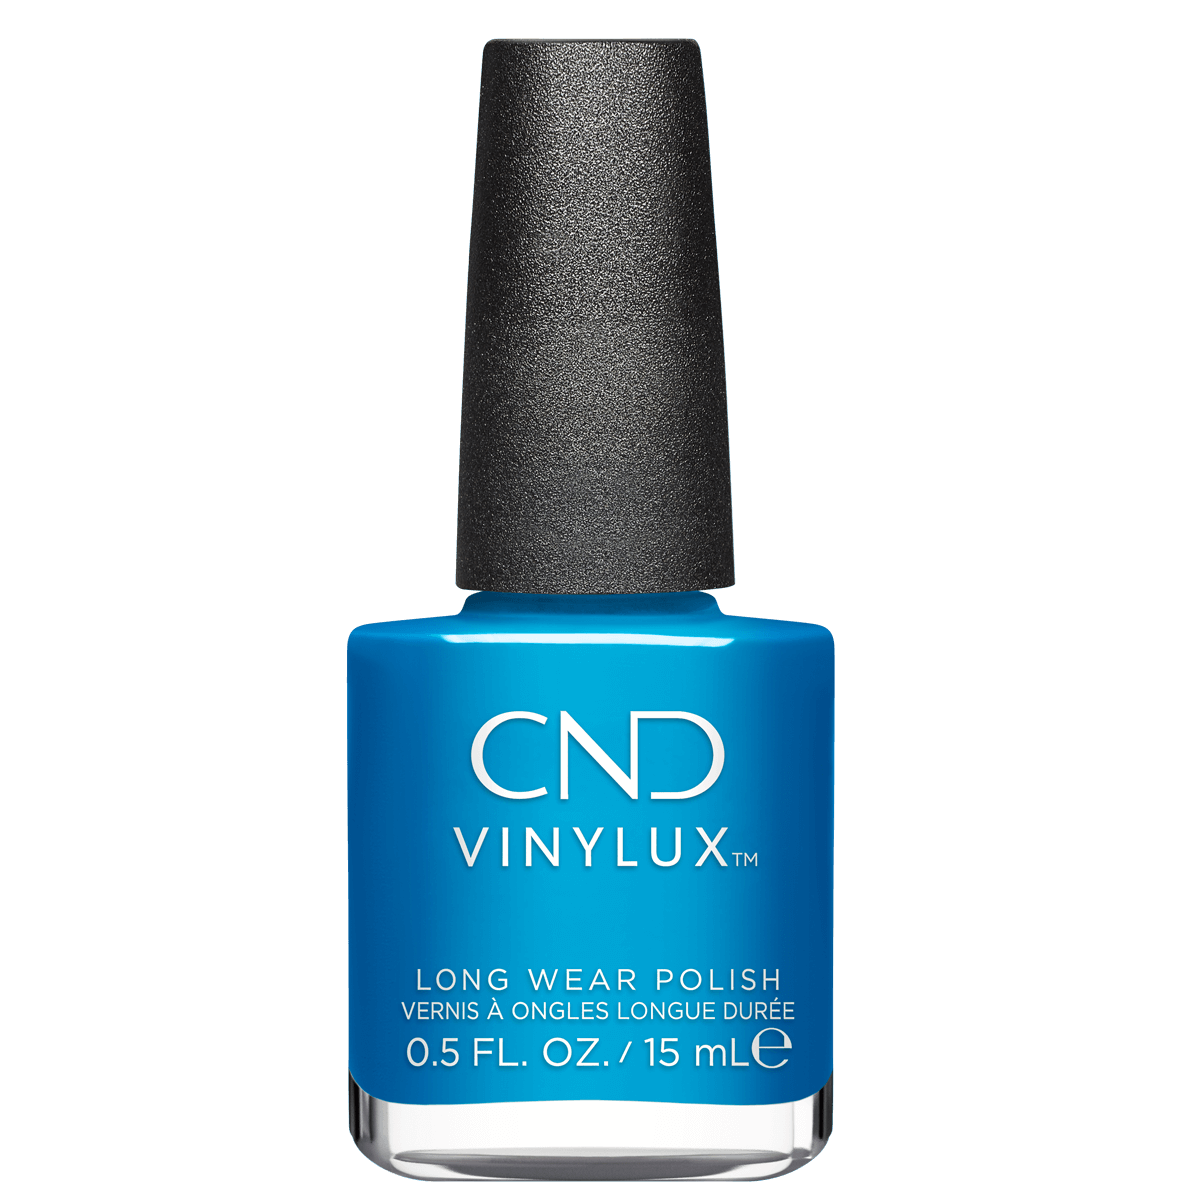 Vinylux CND Vernis à Ongles #451 What's Old is Blue Again 15mL